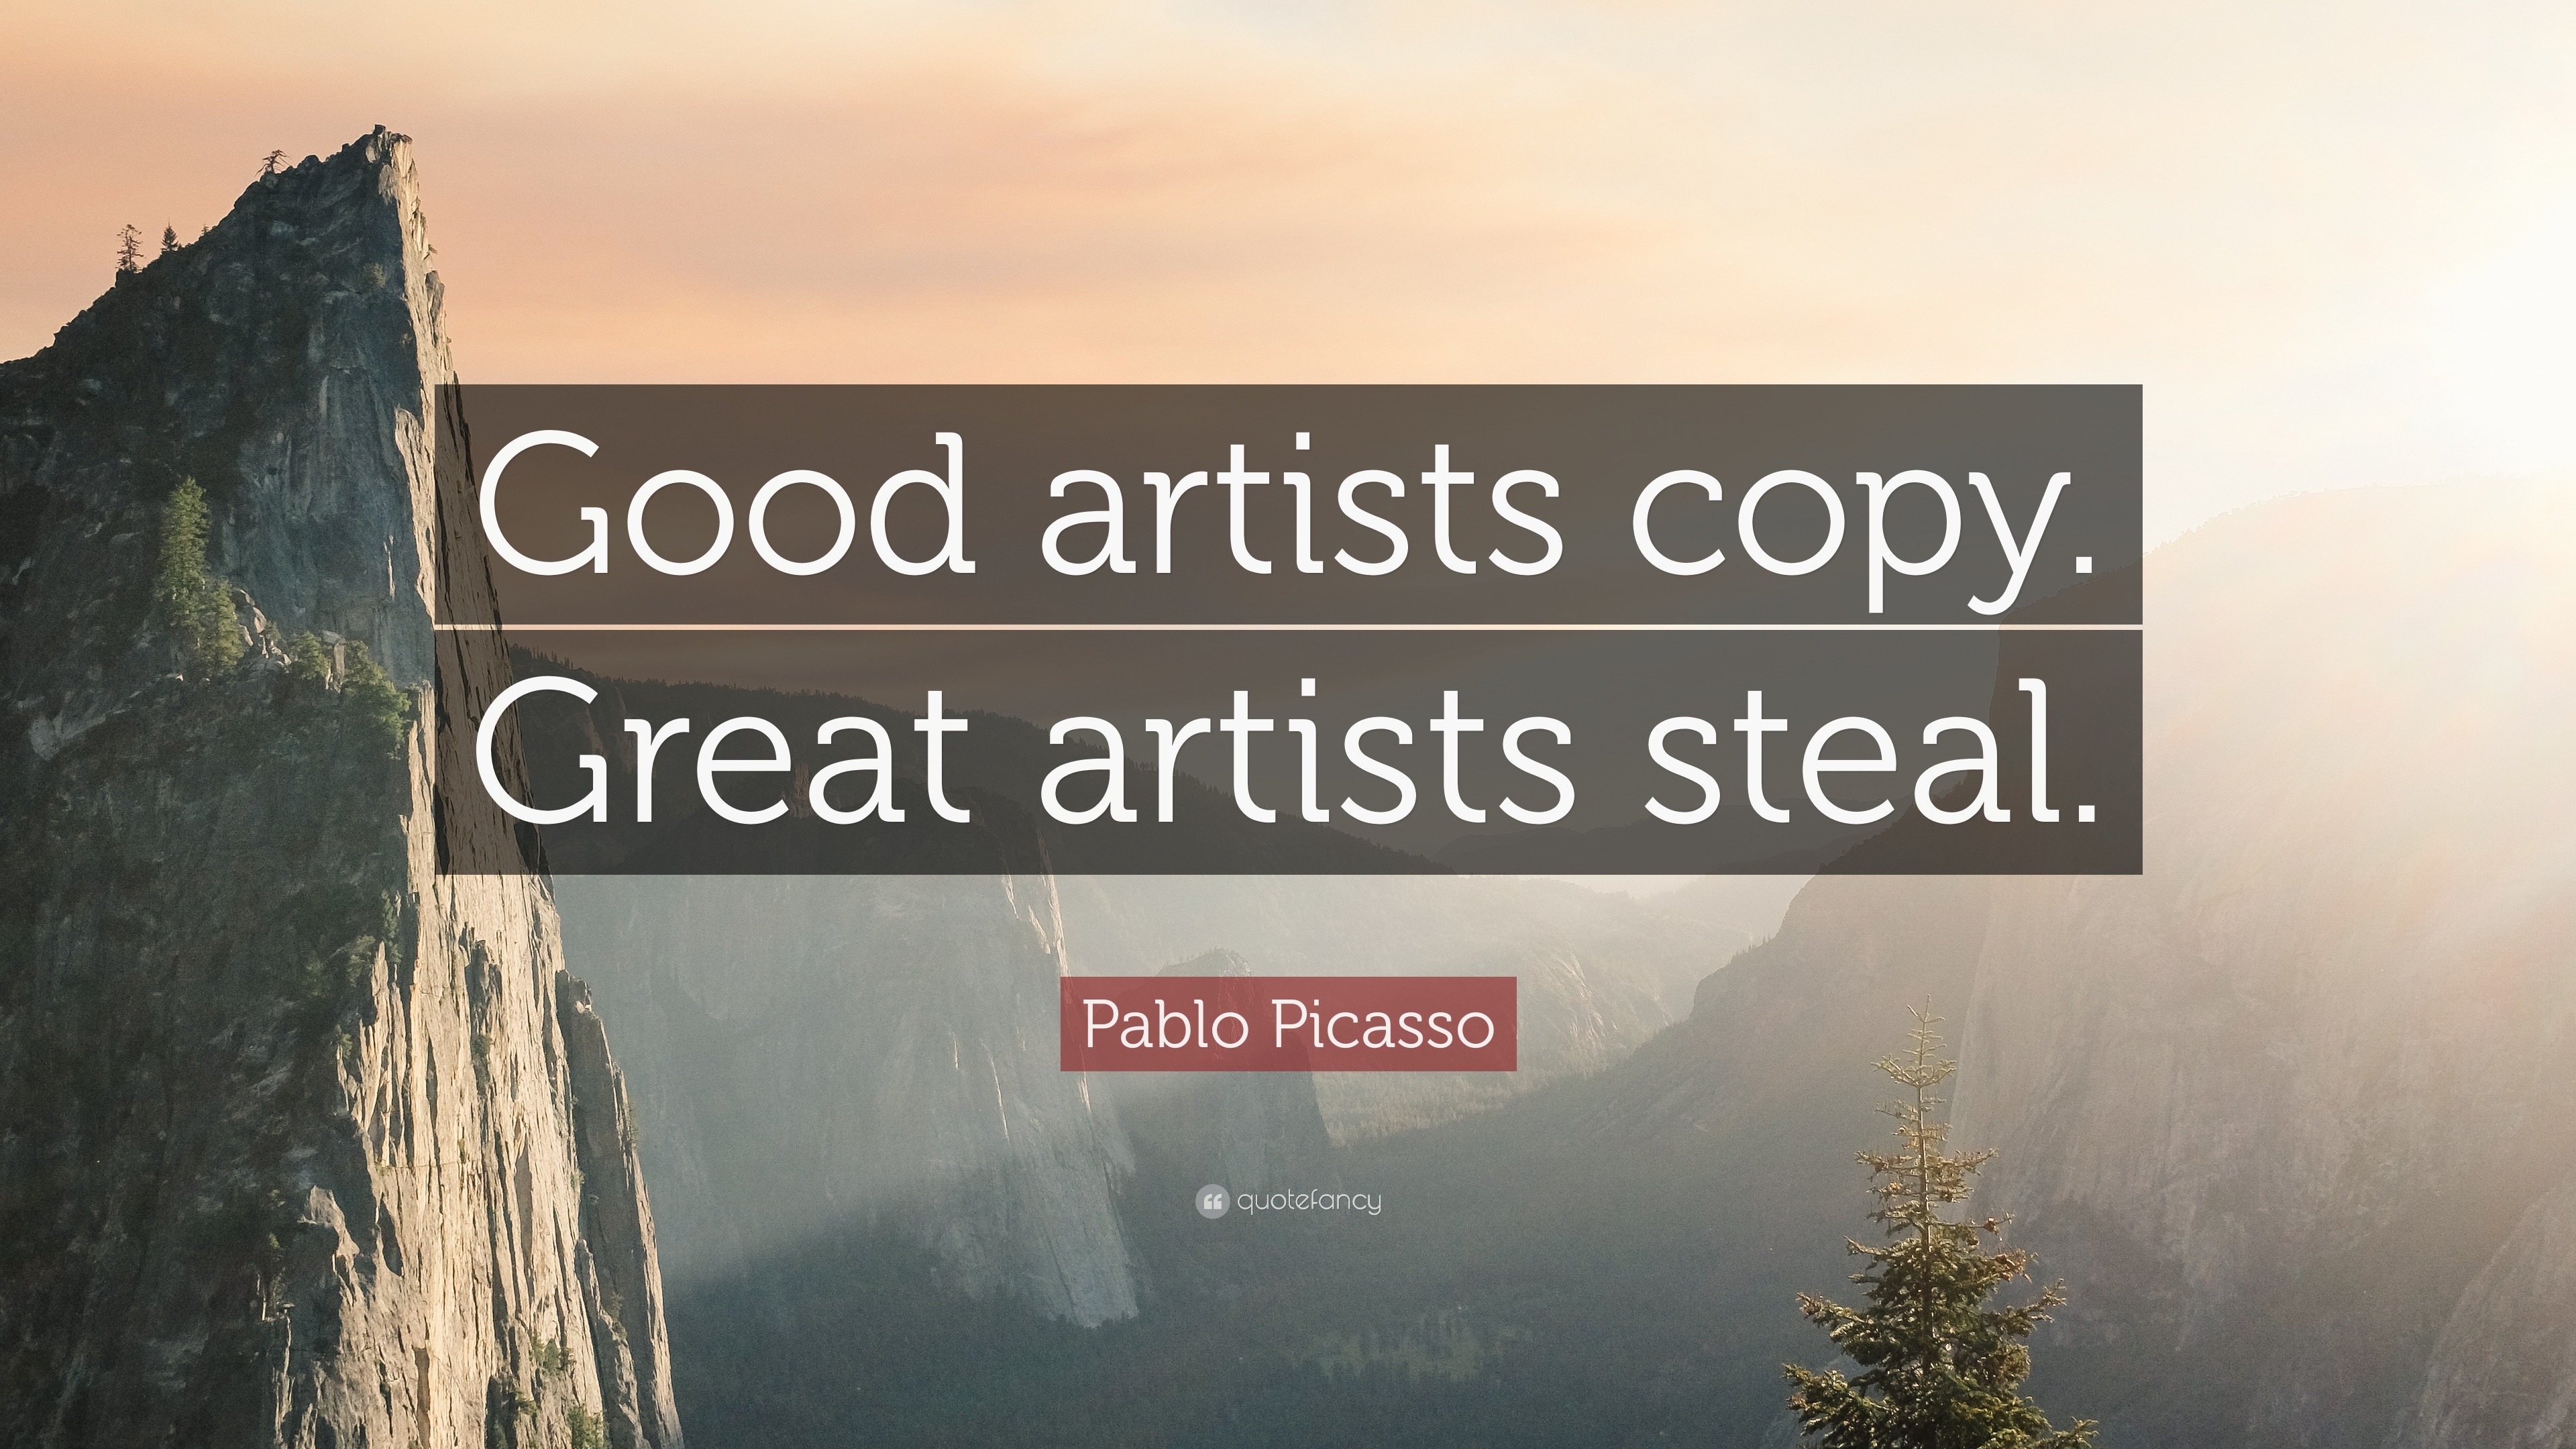 Pablo Picasso Quote: “Good artists copy. Great artists steal.”